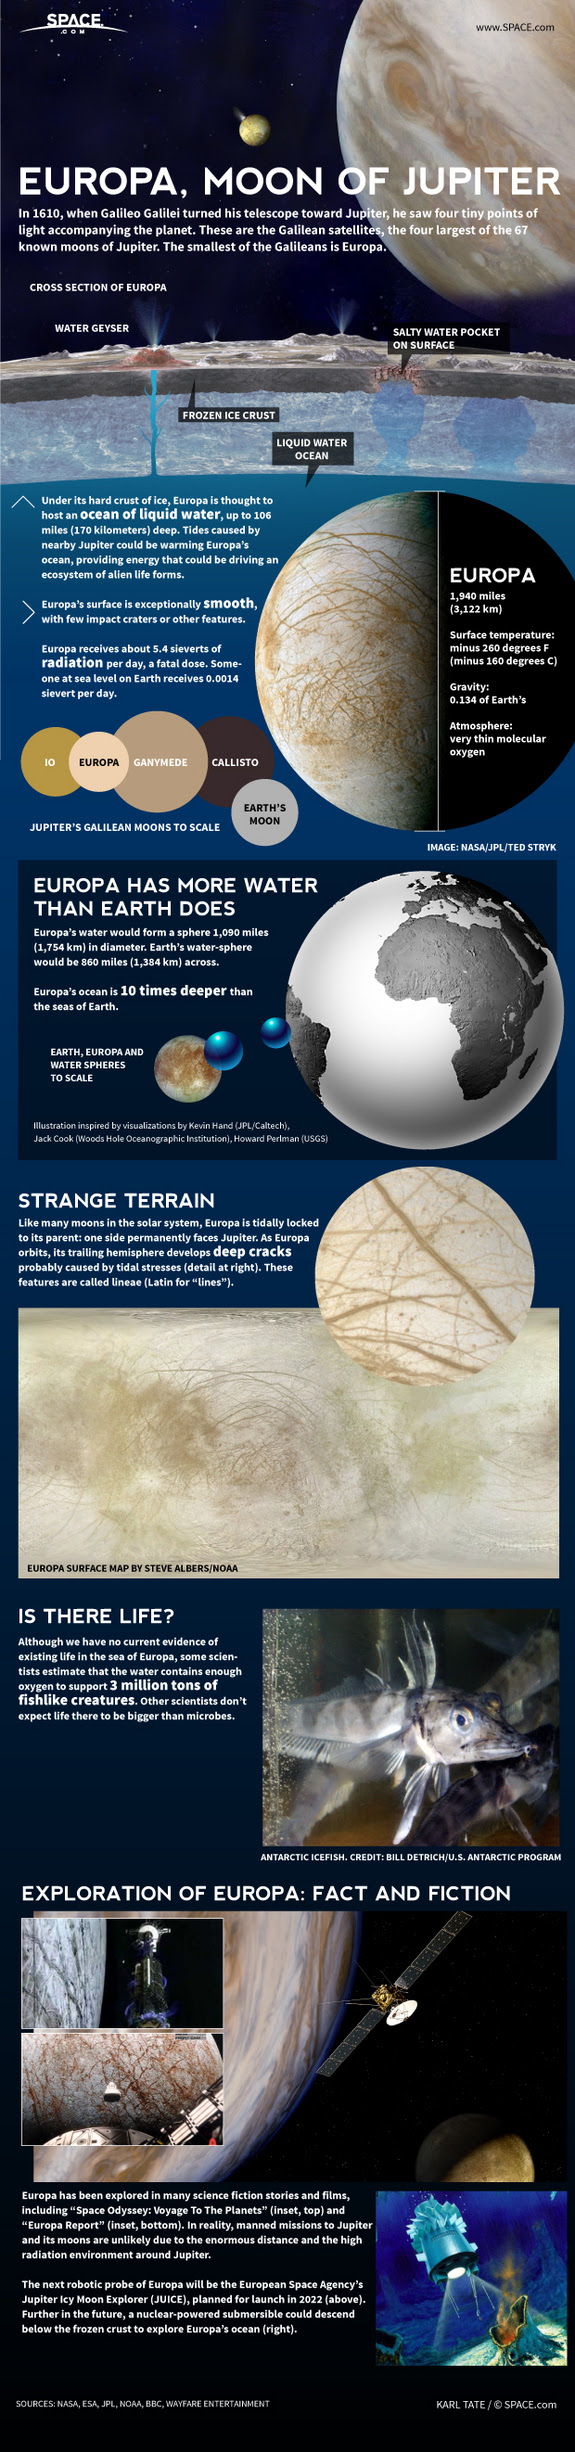 Find out about Europa, a watery moon of Jupiter, in this SPACE.com infographic.